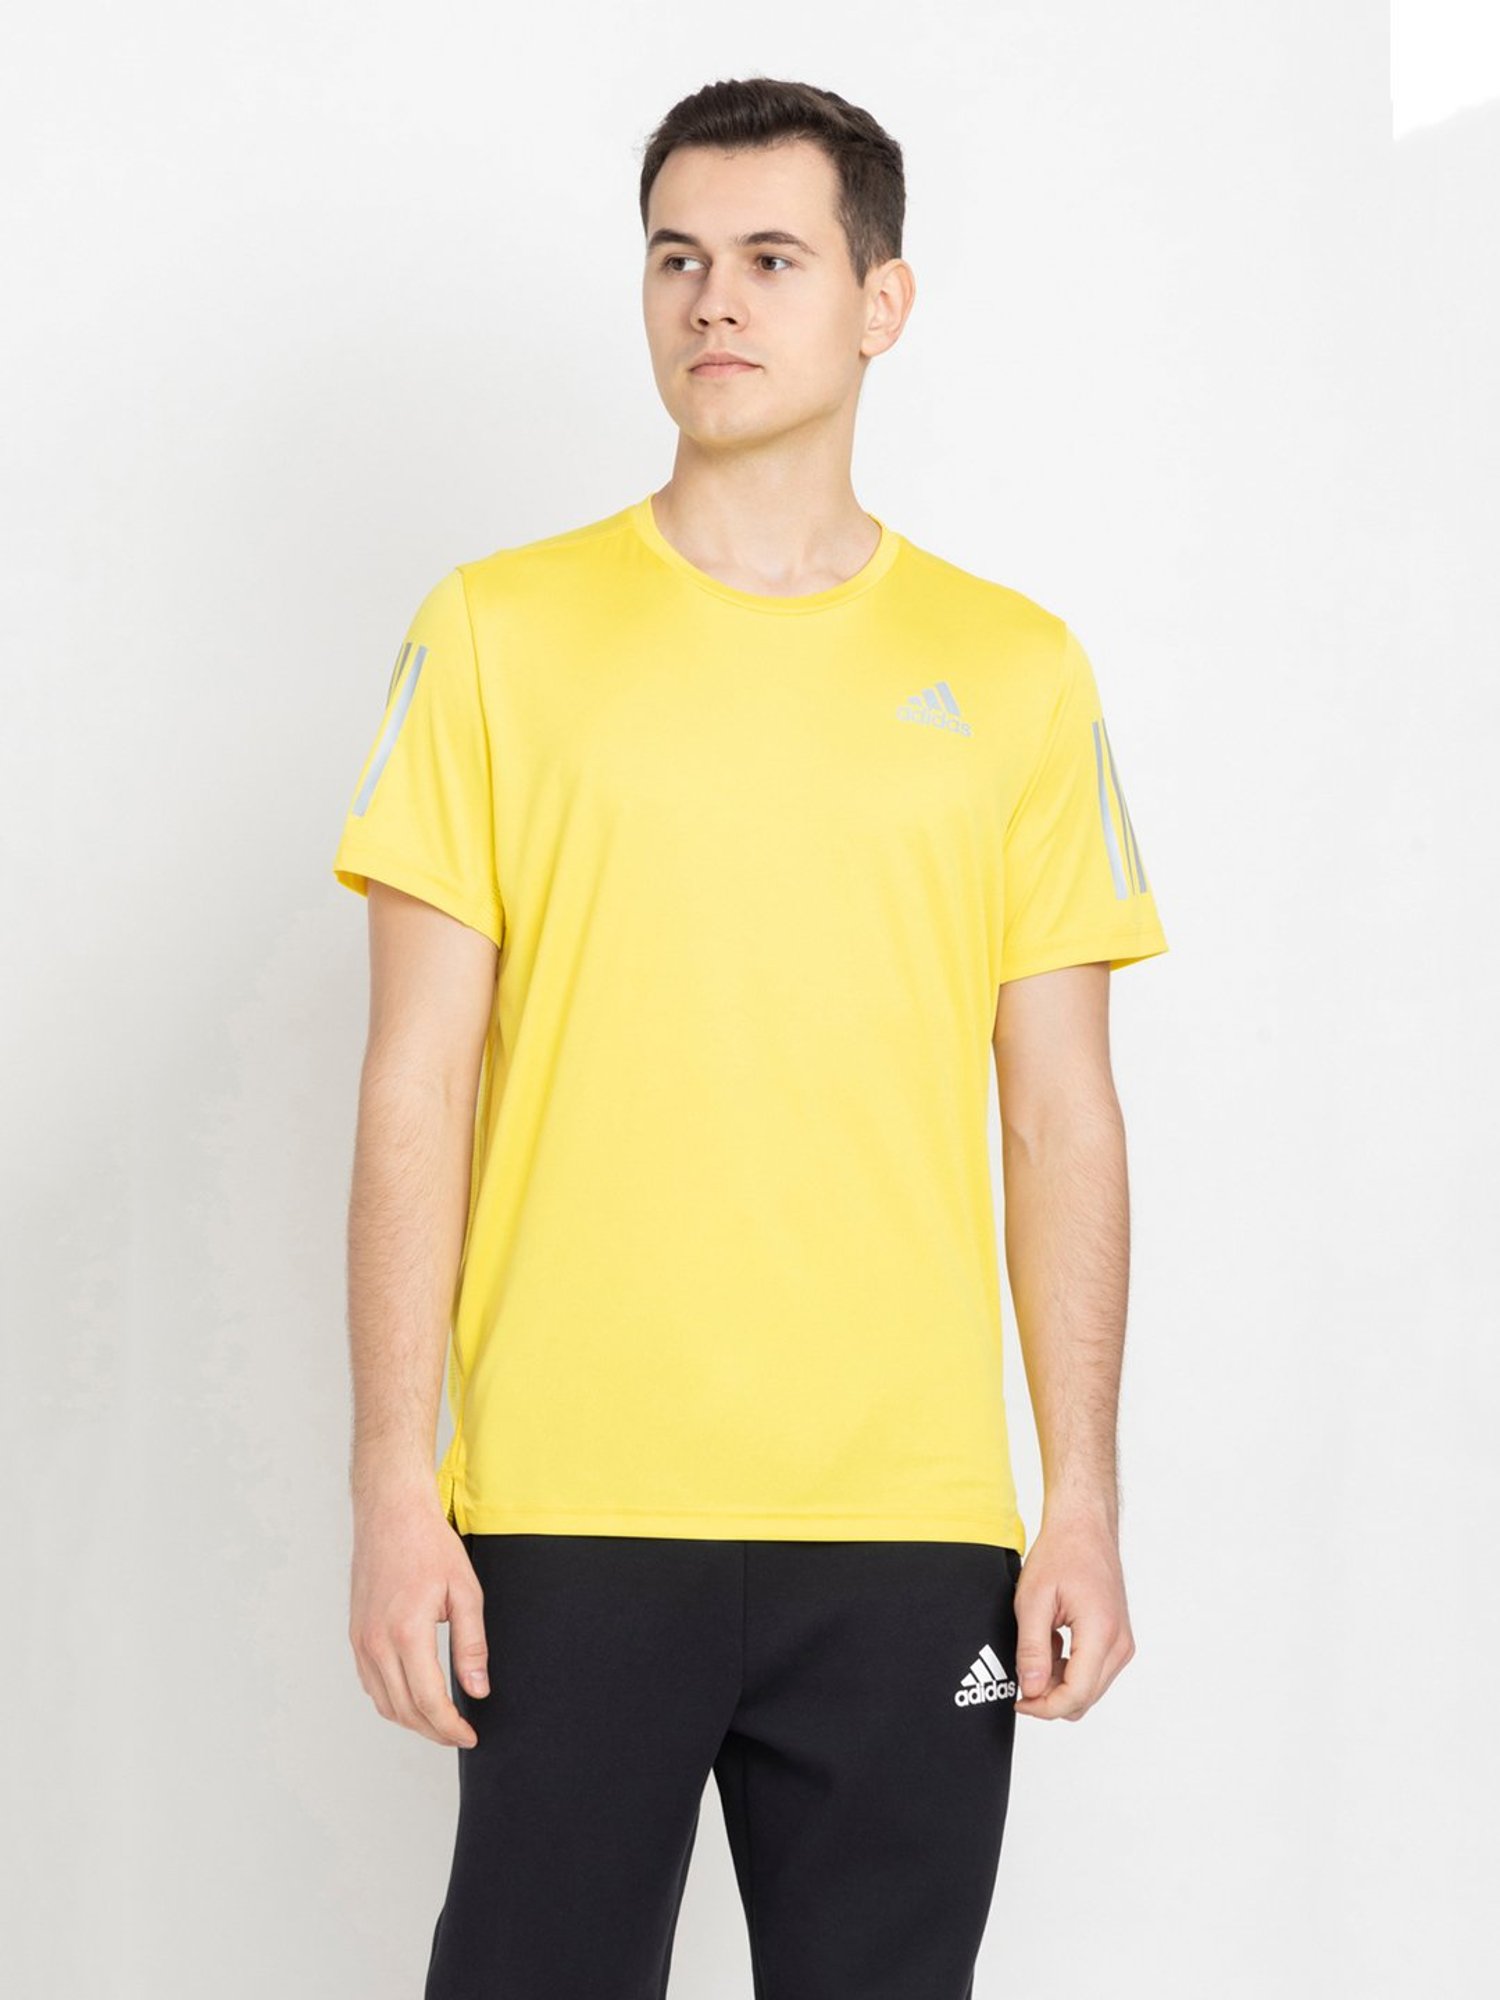 Adidas Blues Playmaker Tee Athletic Yellow S Mens